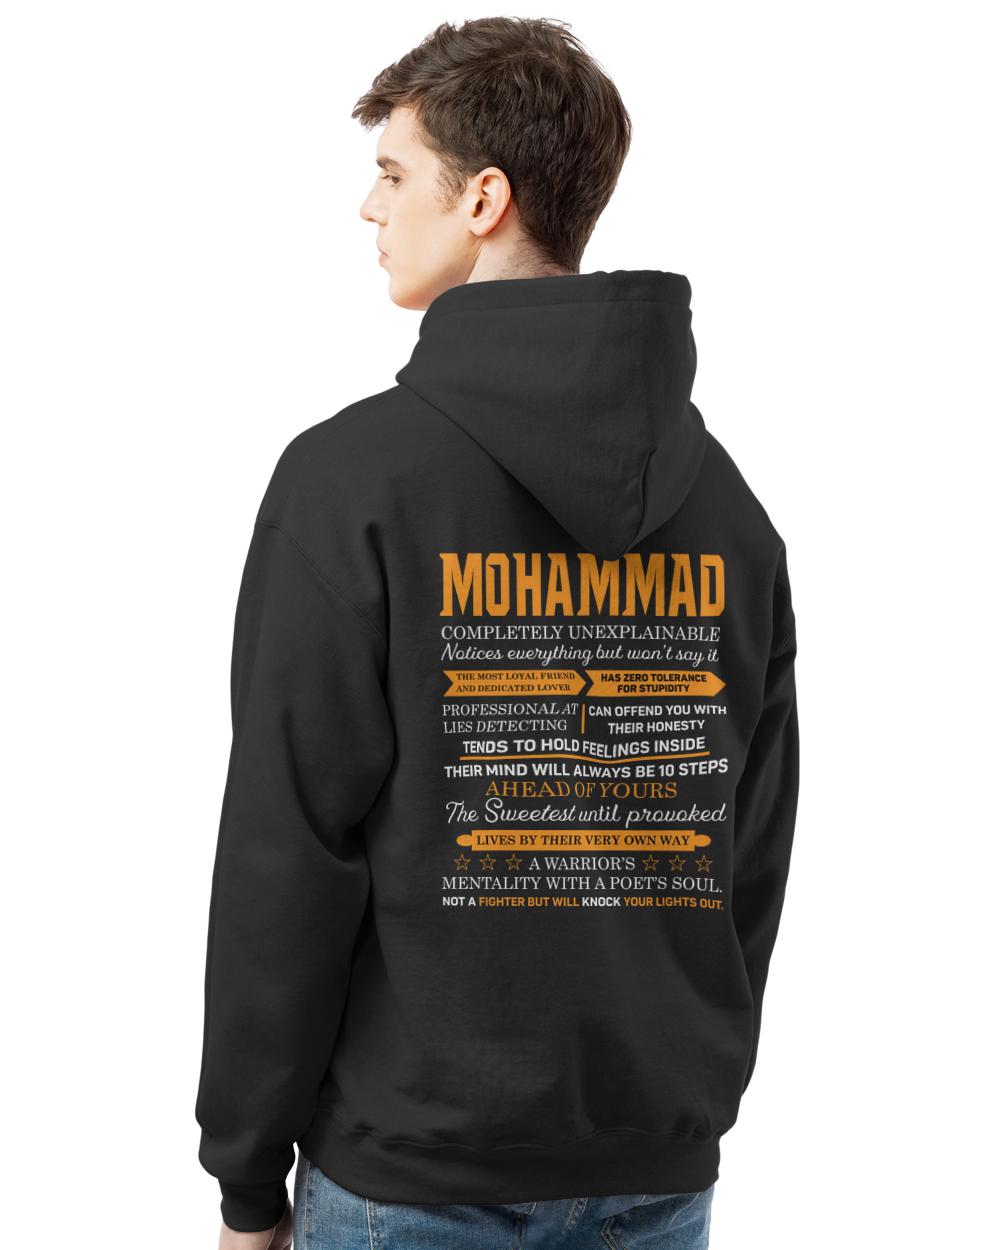 MOHAMMAD-H2-N1